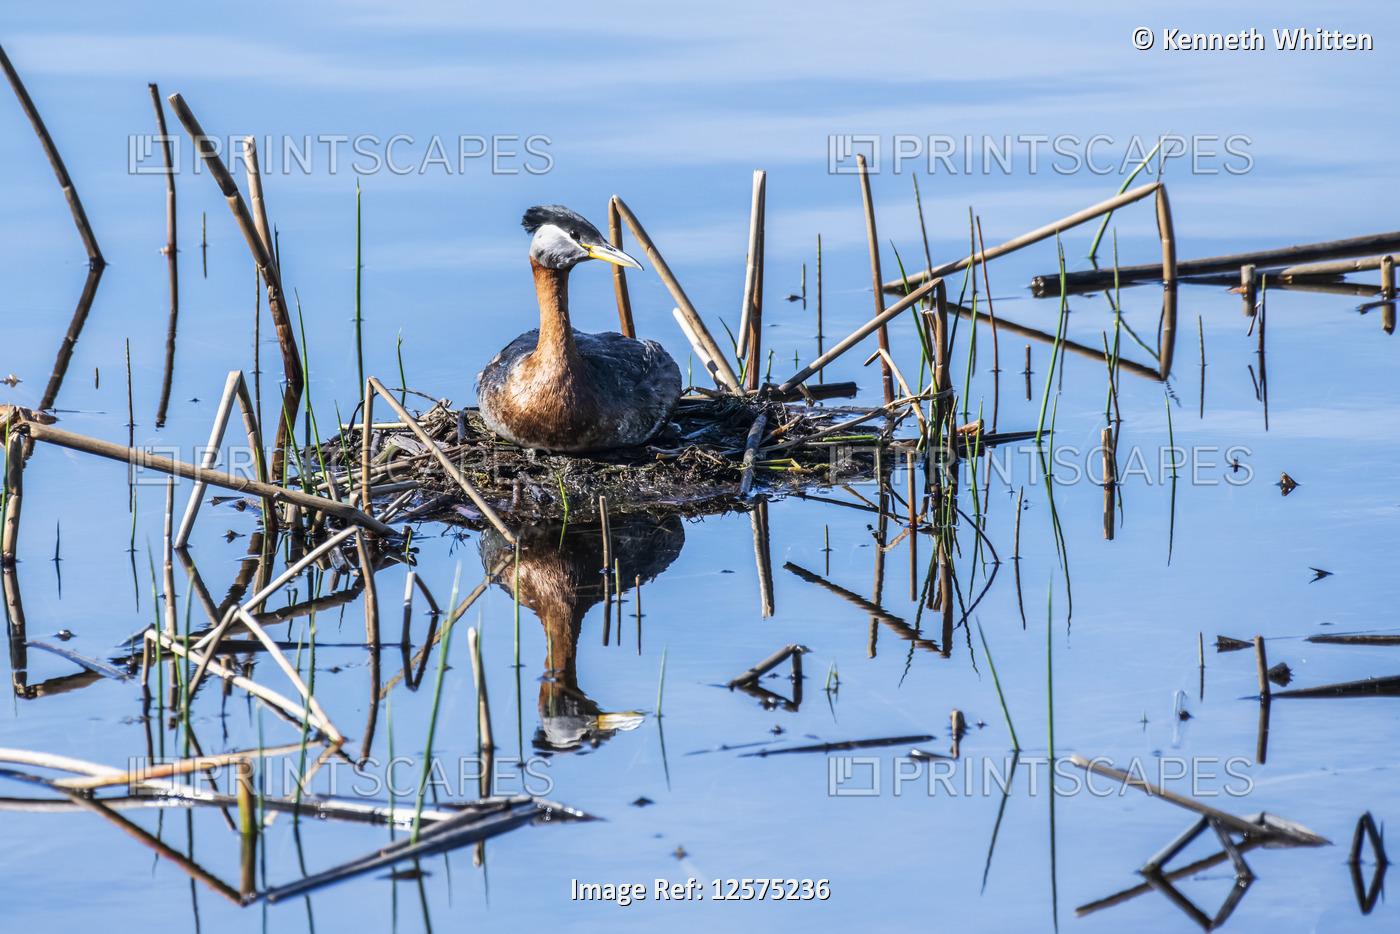 Red-necked Grebe settles on its eggs in a nest anchored in cattails in a pond, Alaska, USA